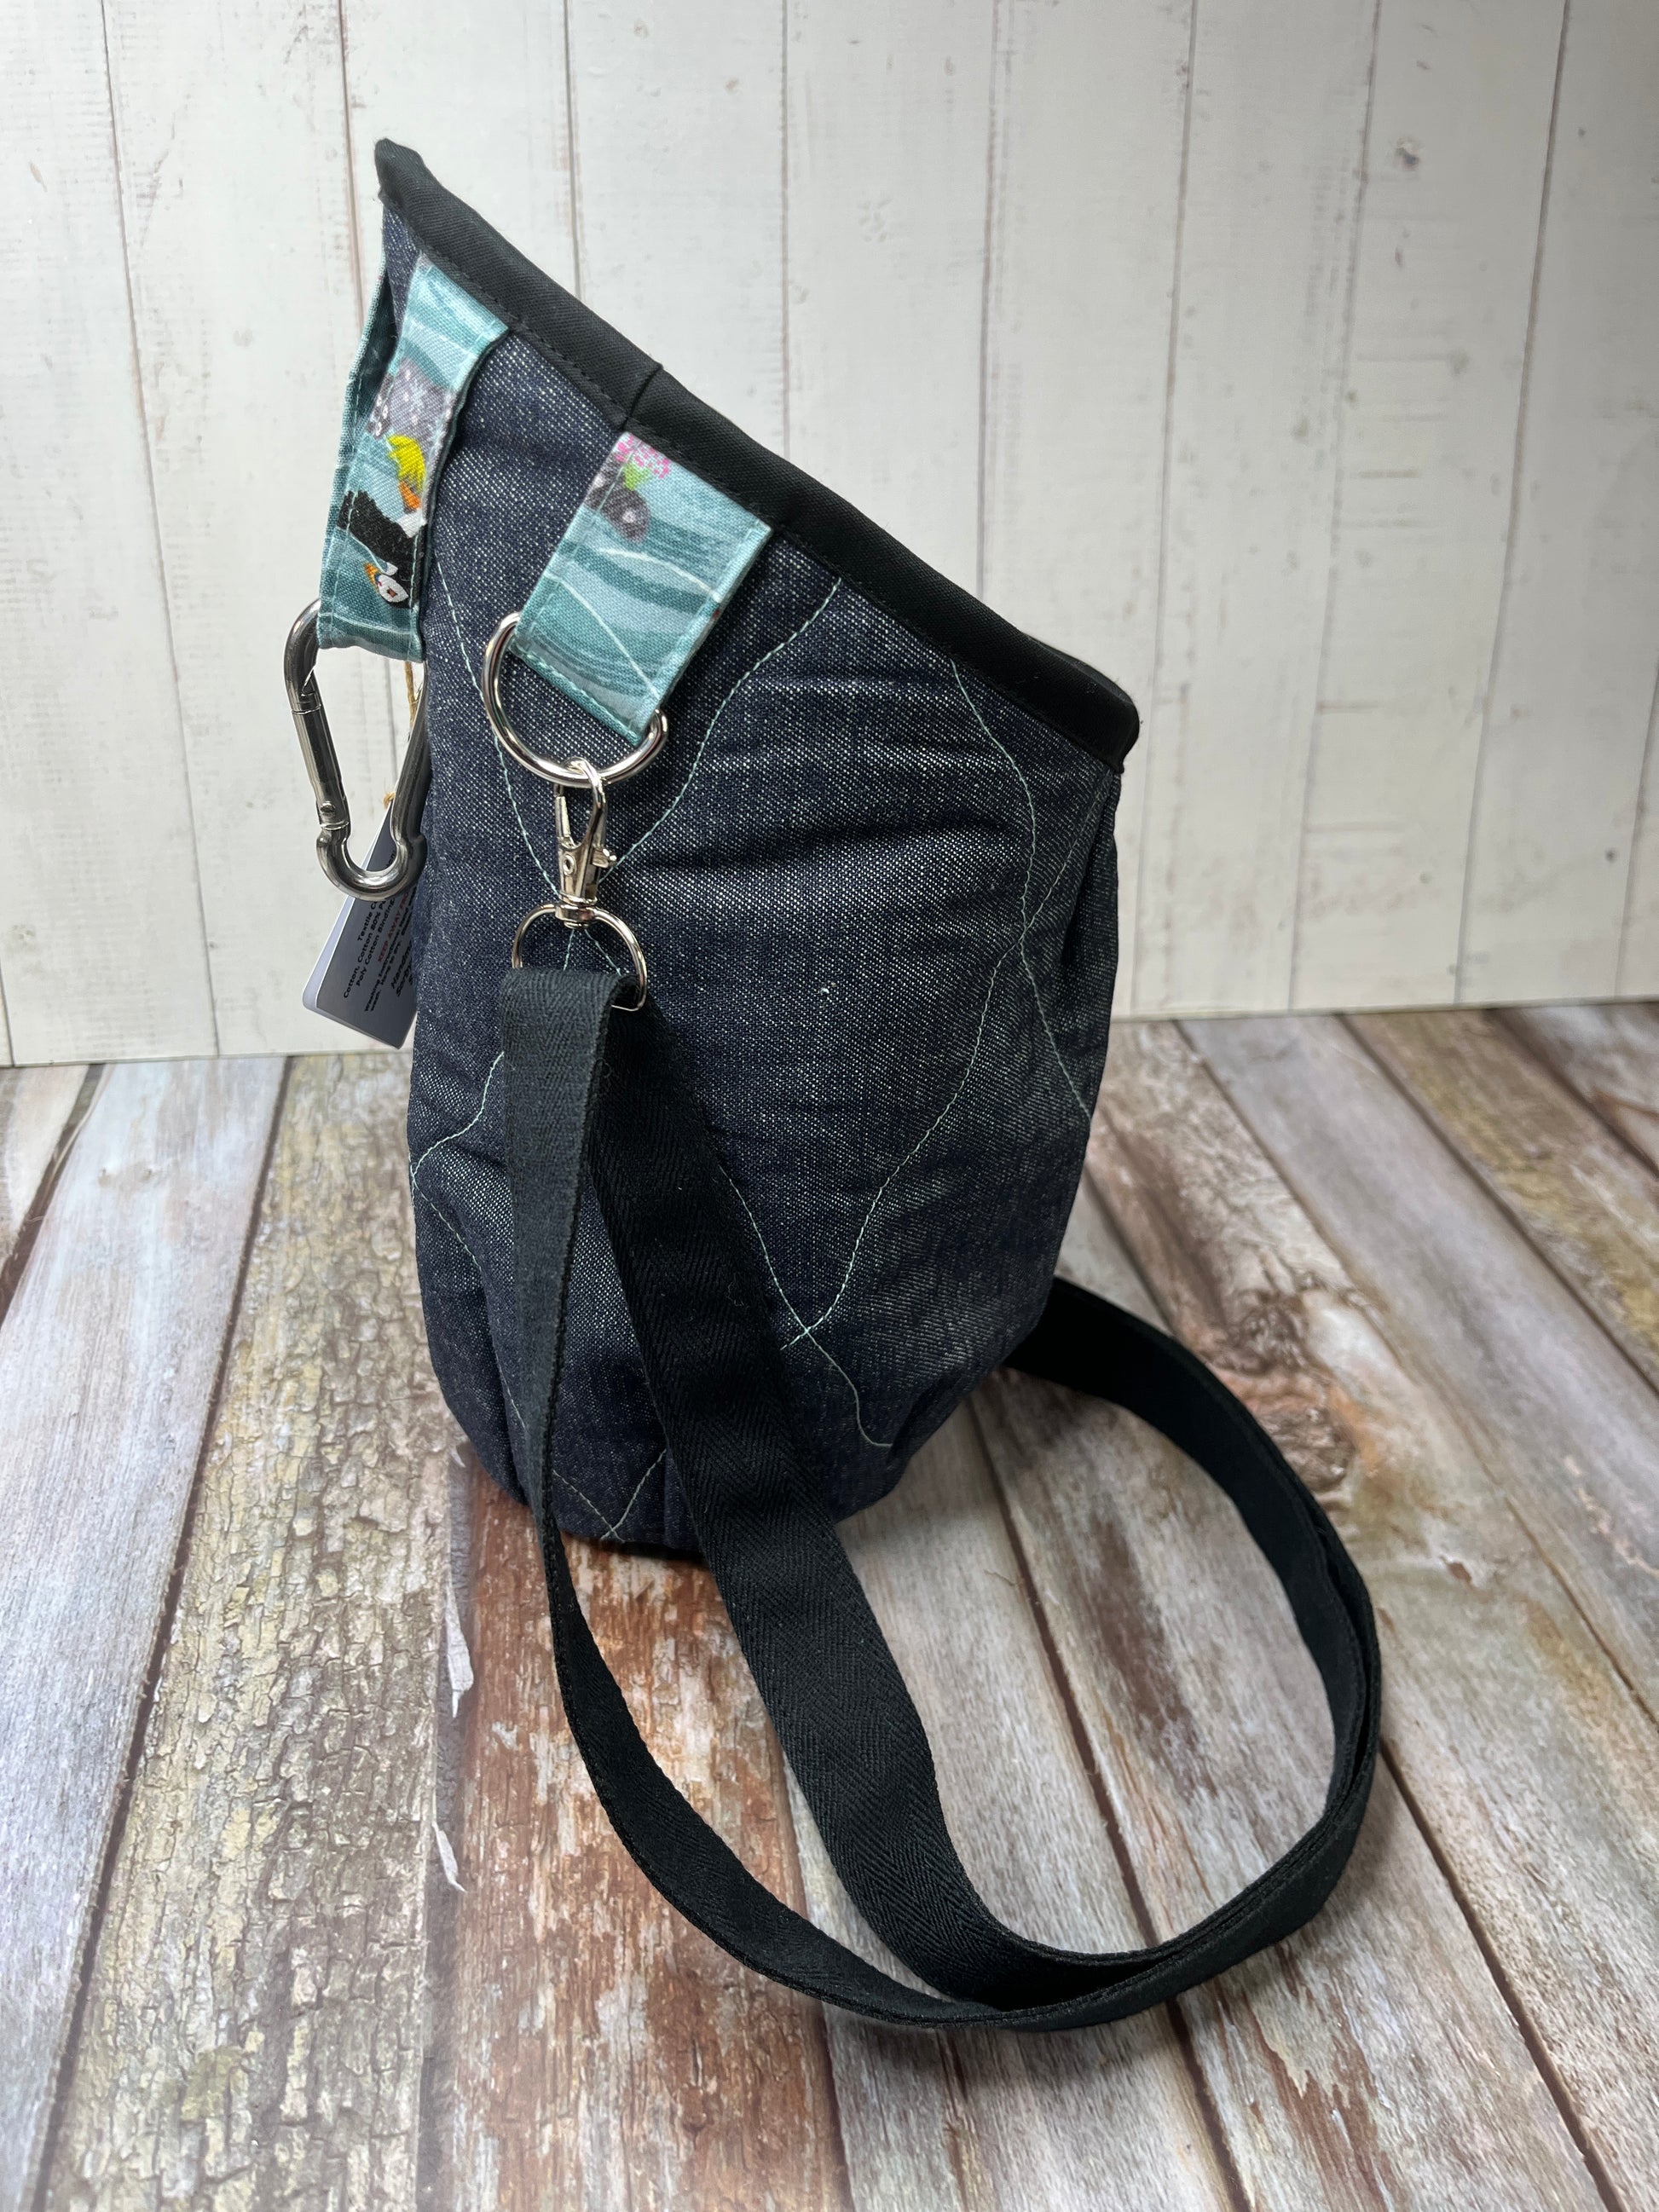 New Style Denim Clothes Peg Bag - Green Puffin on Rocks - Uphouse Crafts